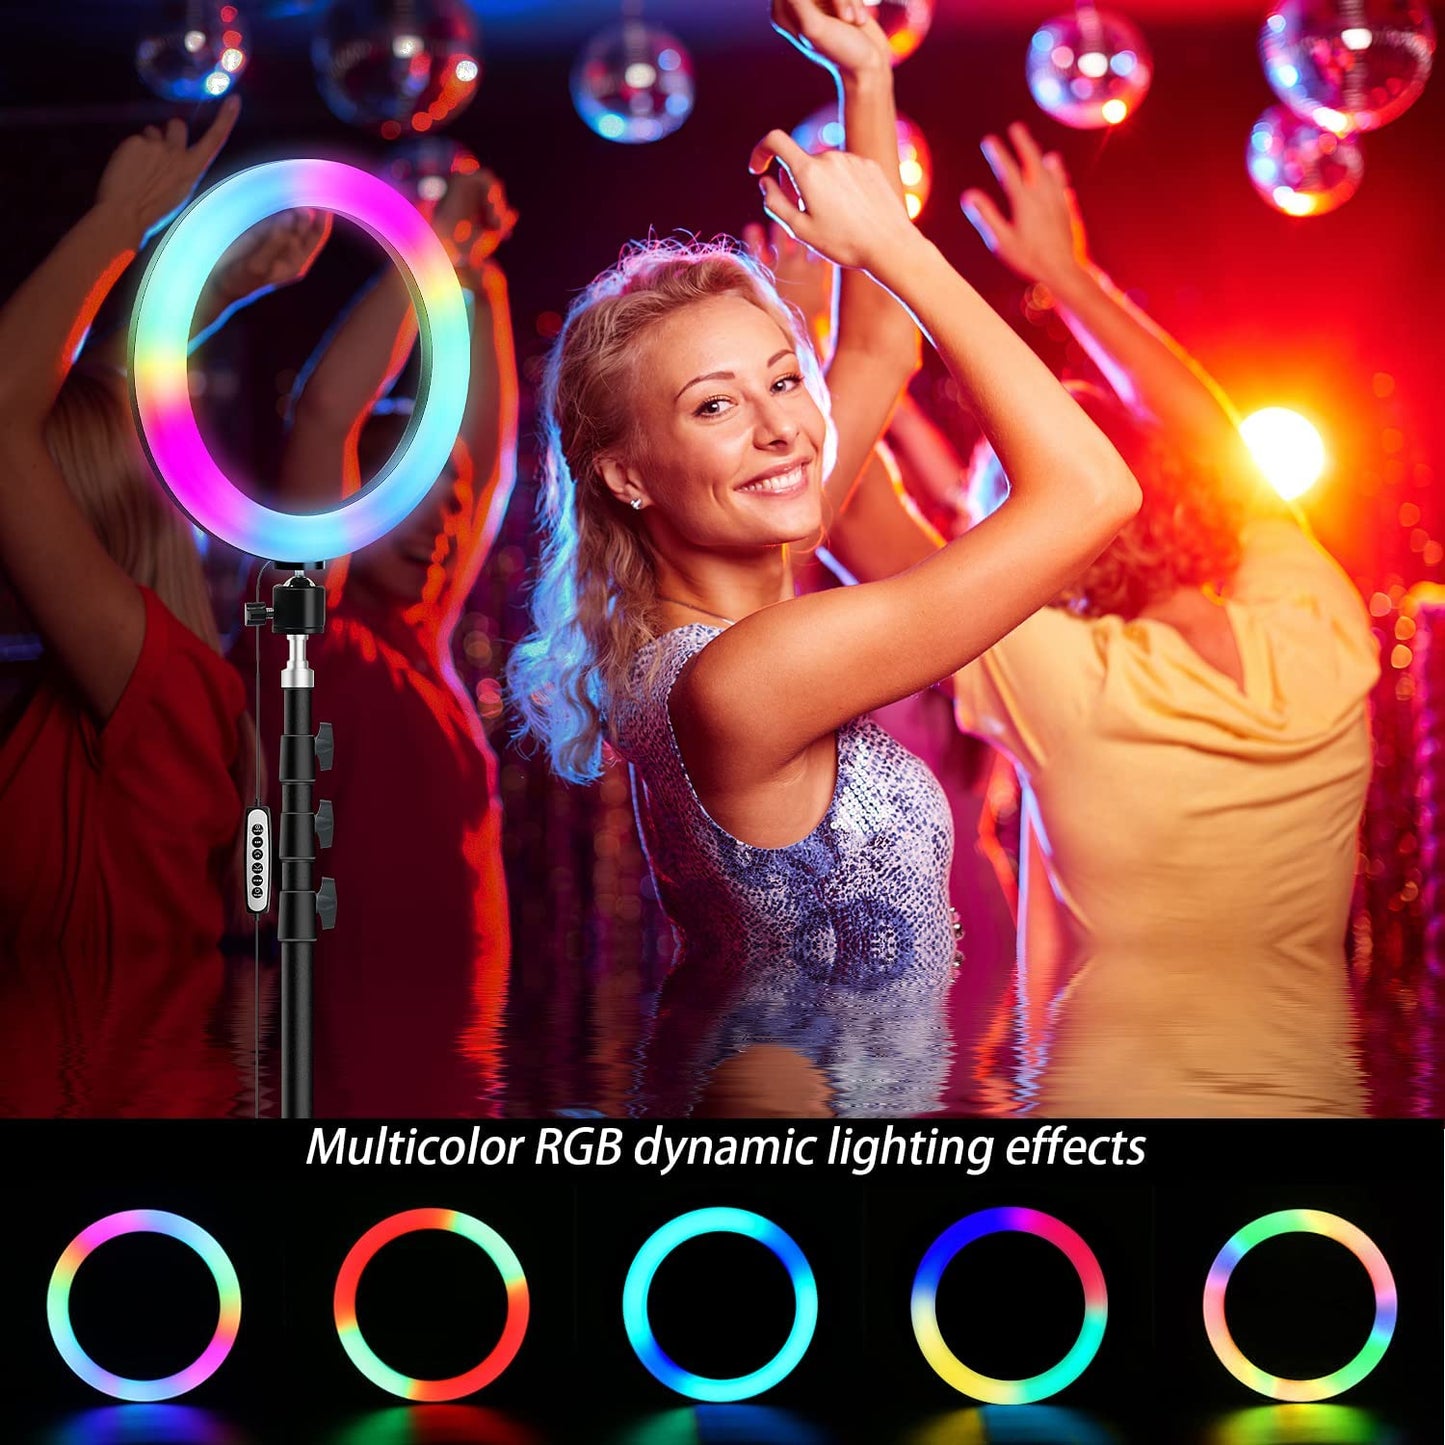 10" RGB Ring Light with 63" Tripod Stand, Dimmable USB LED Ring Light for Selfie, Makeup, Live Streaming, YouTube, TikTok, Photography